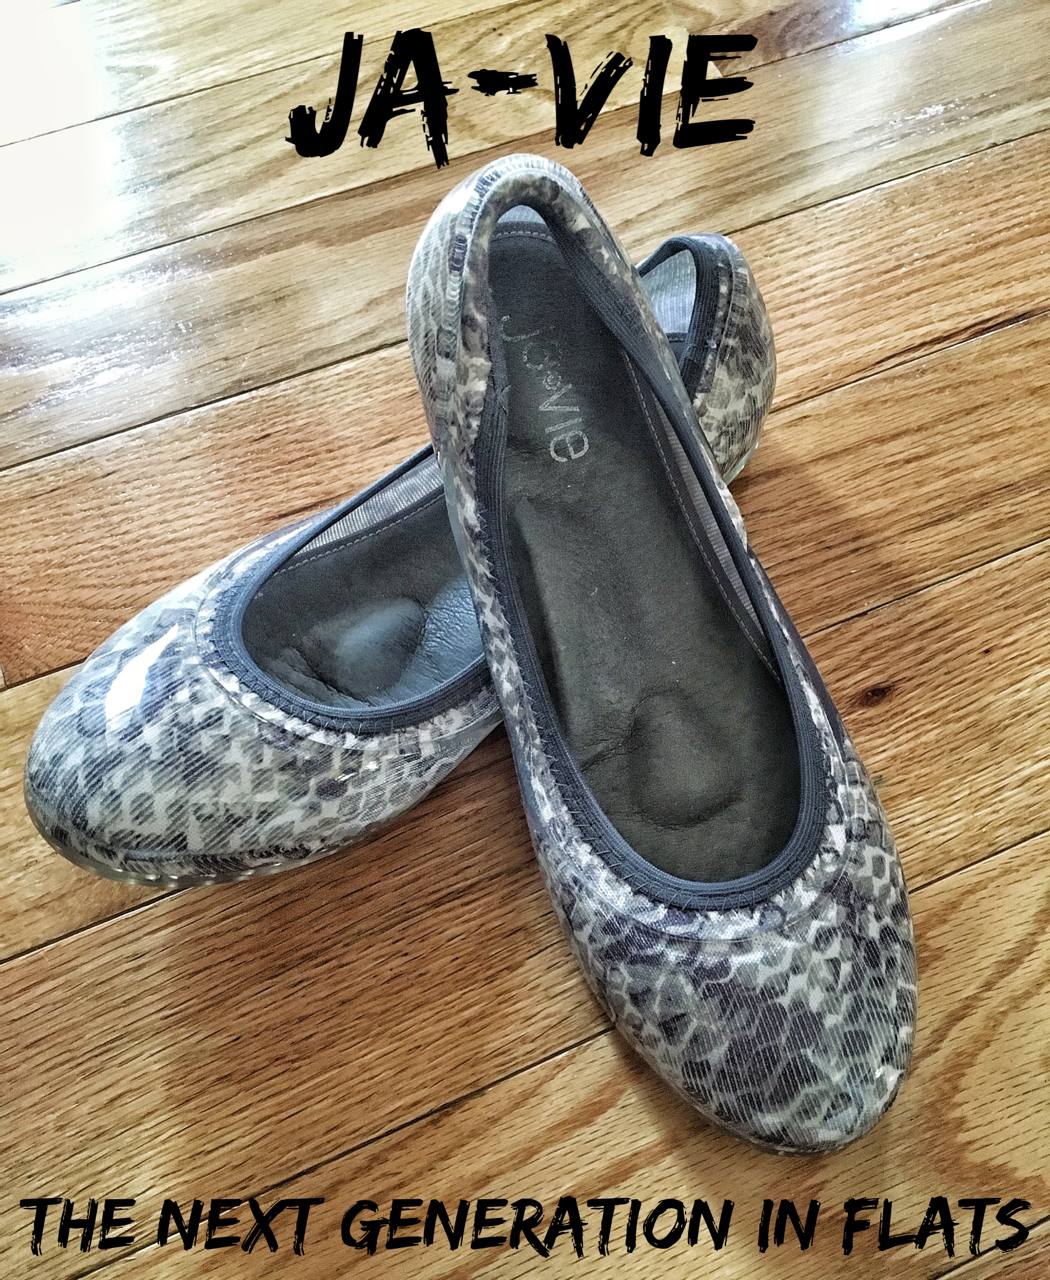 Ja-vie: The Next Generation in Flats (review & giveaway)